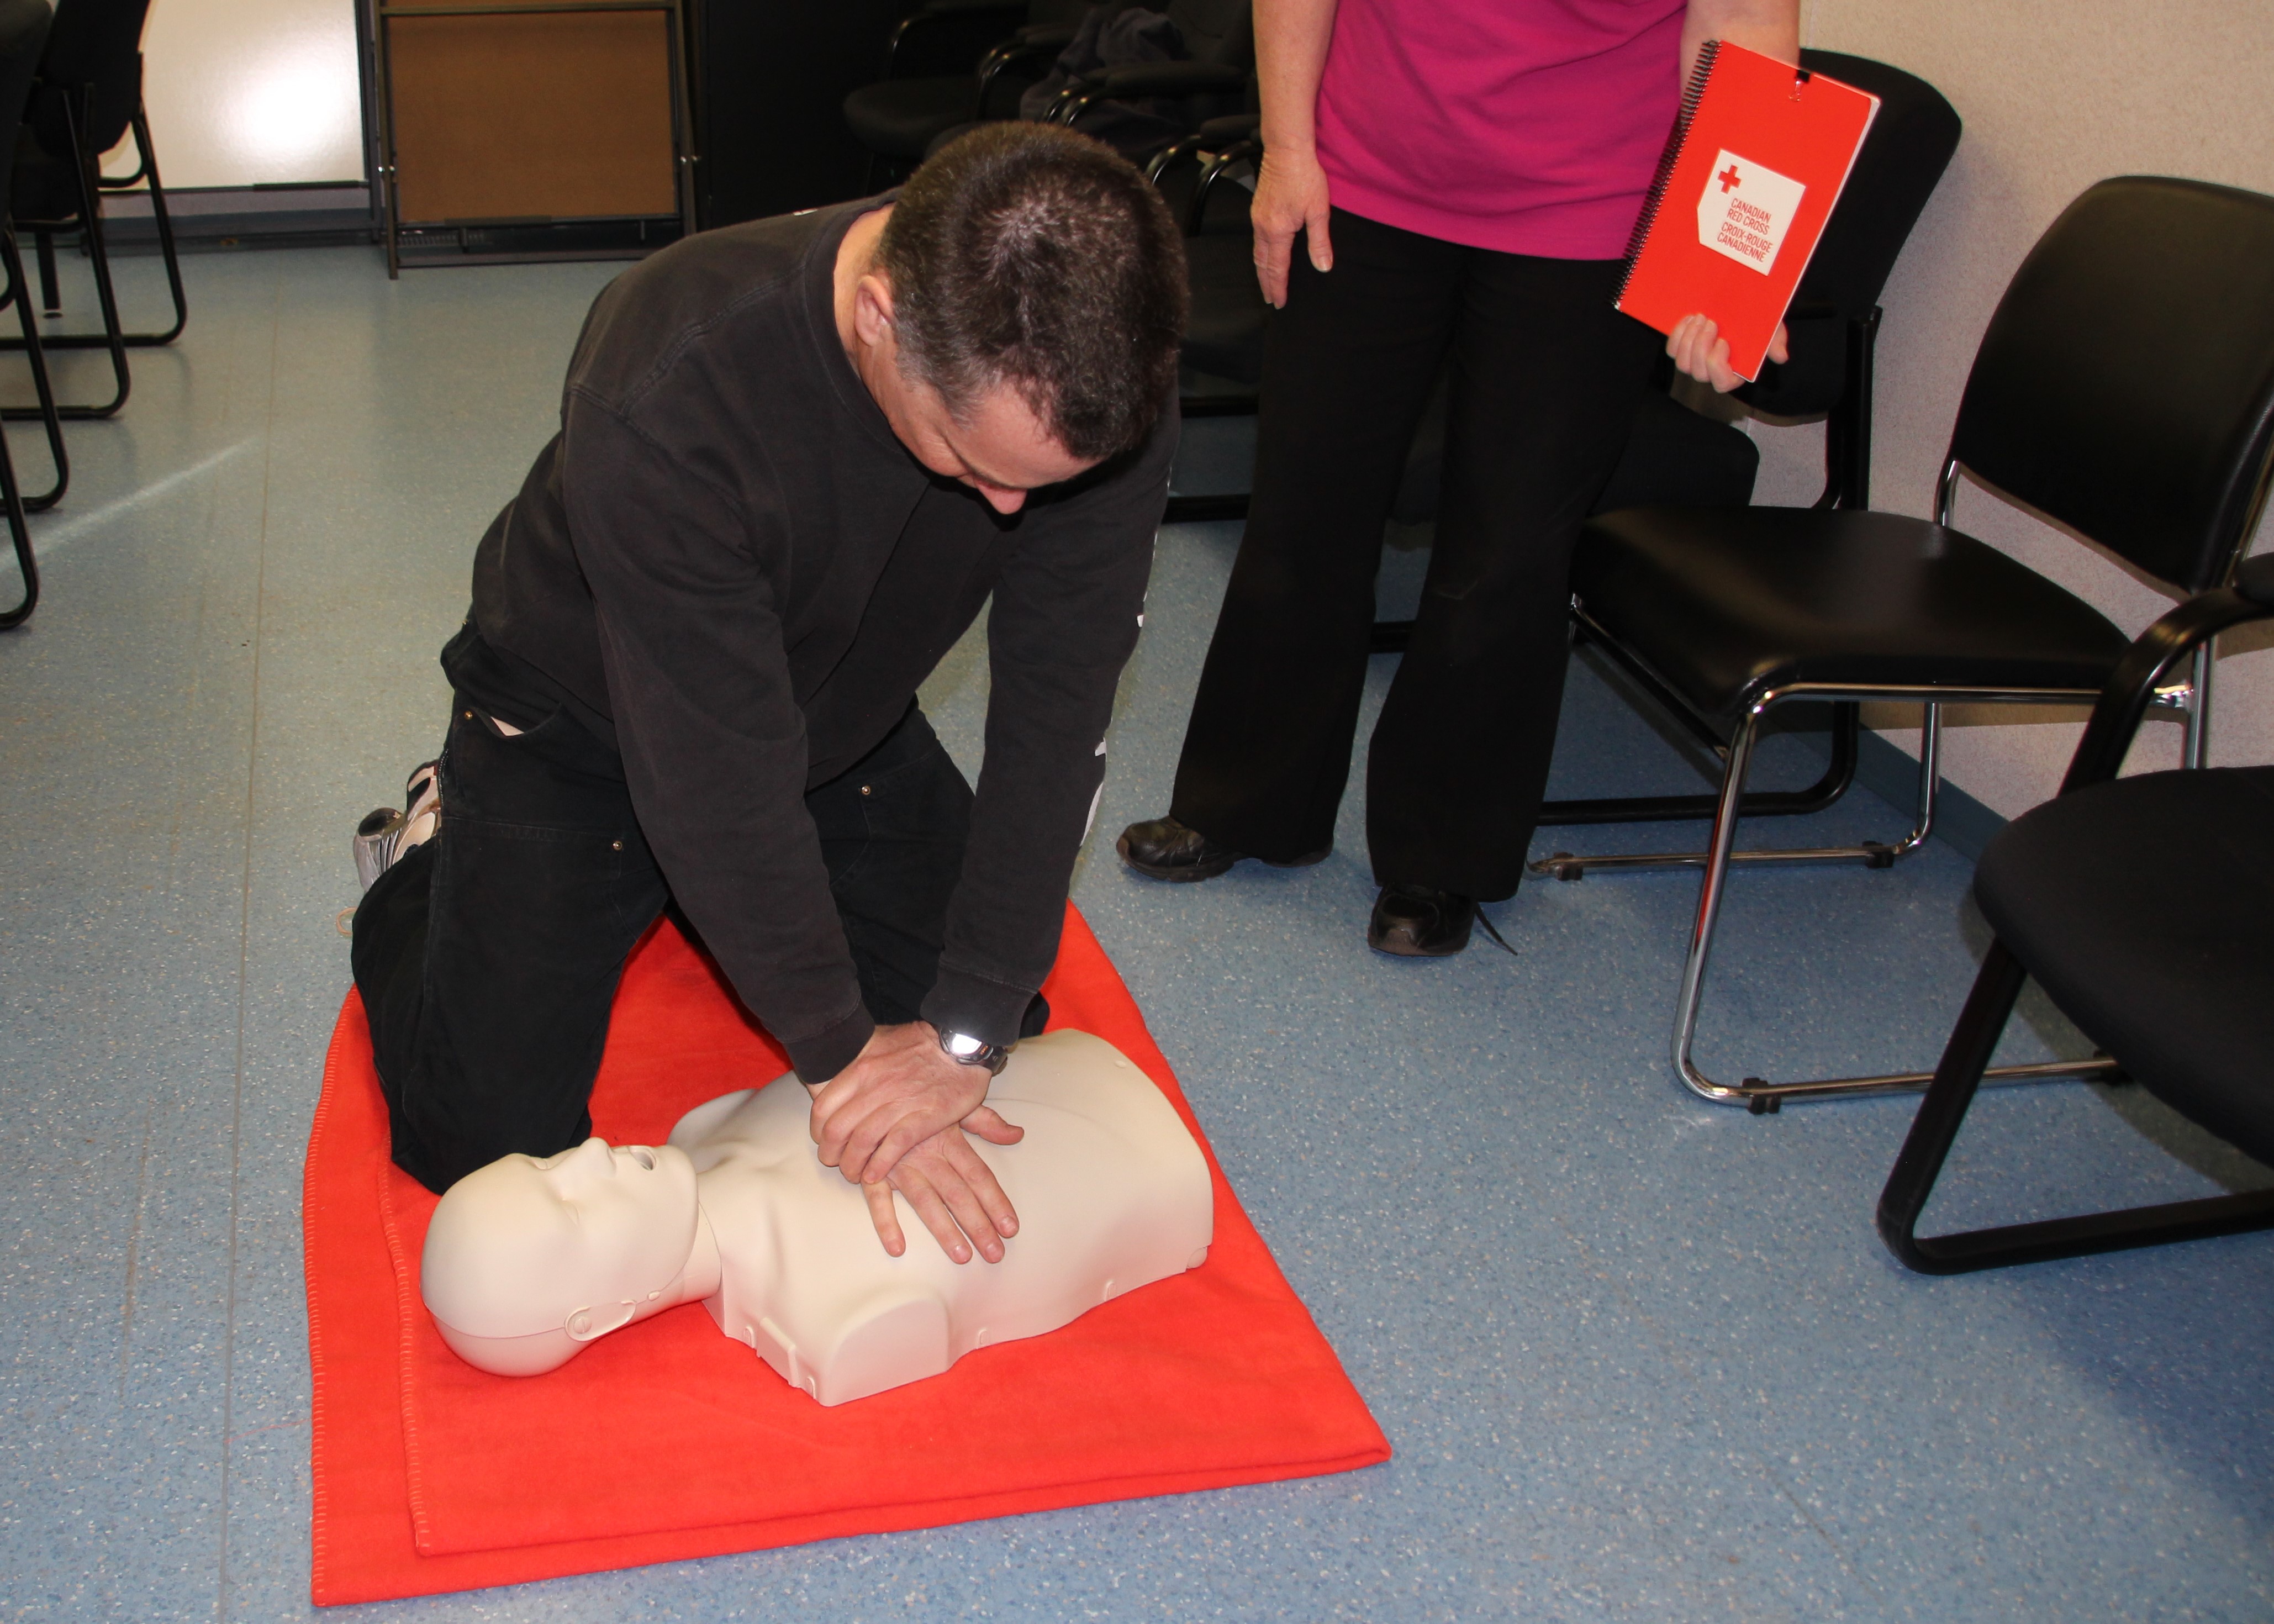 Stephen Tilley, Geological Technician practicing CPR